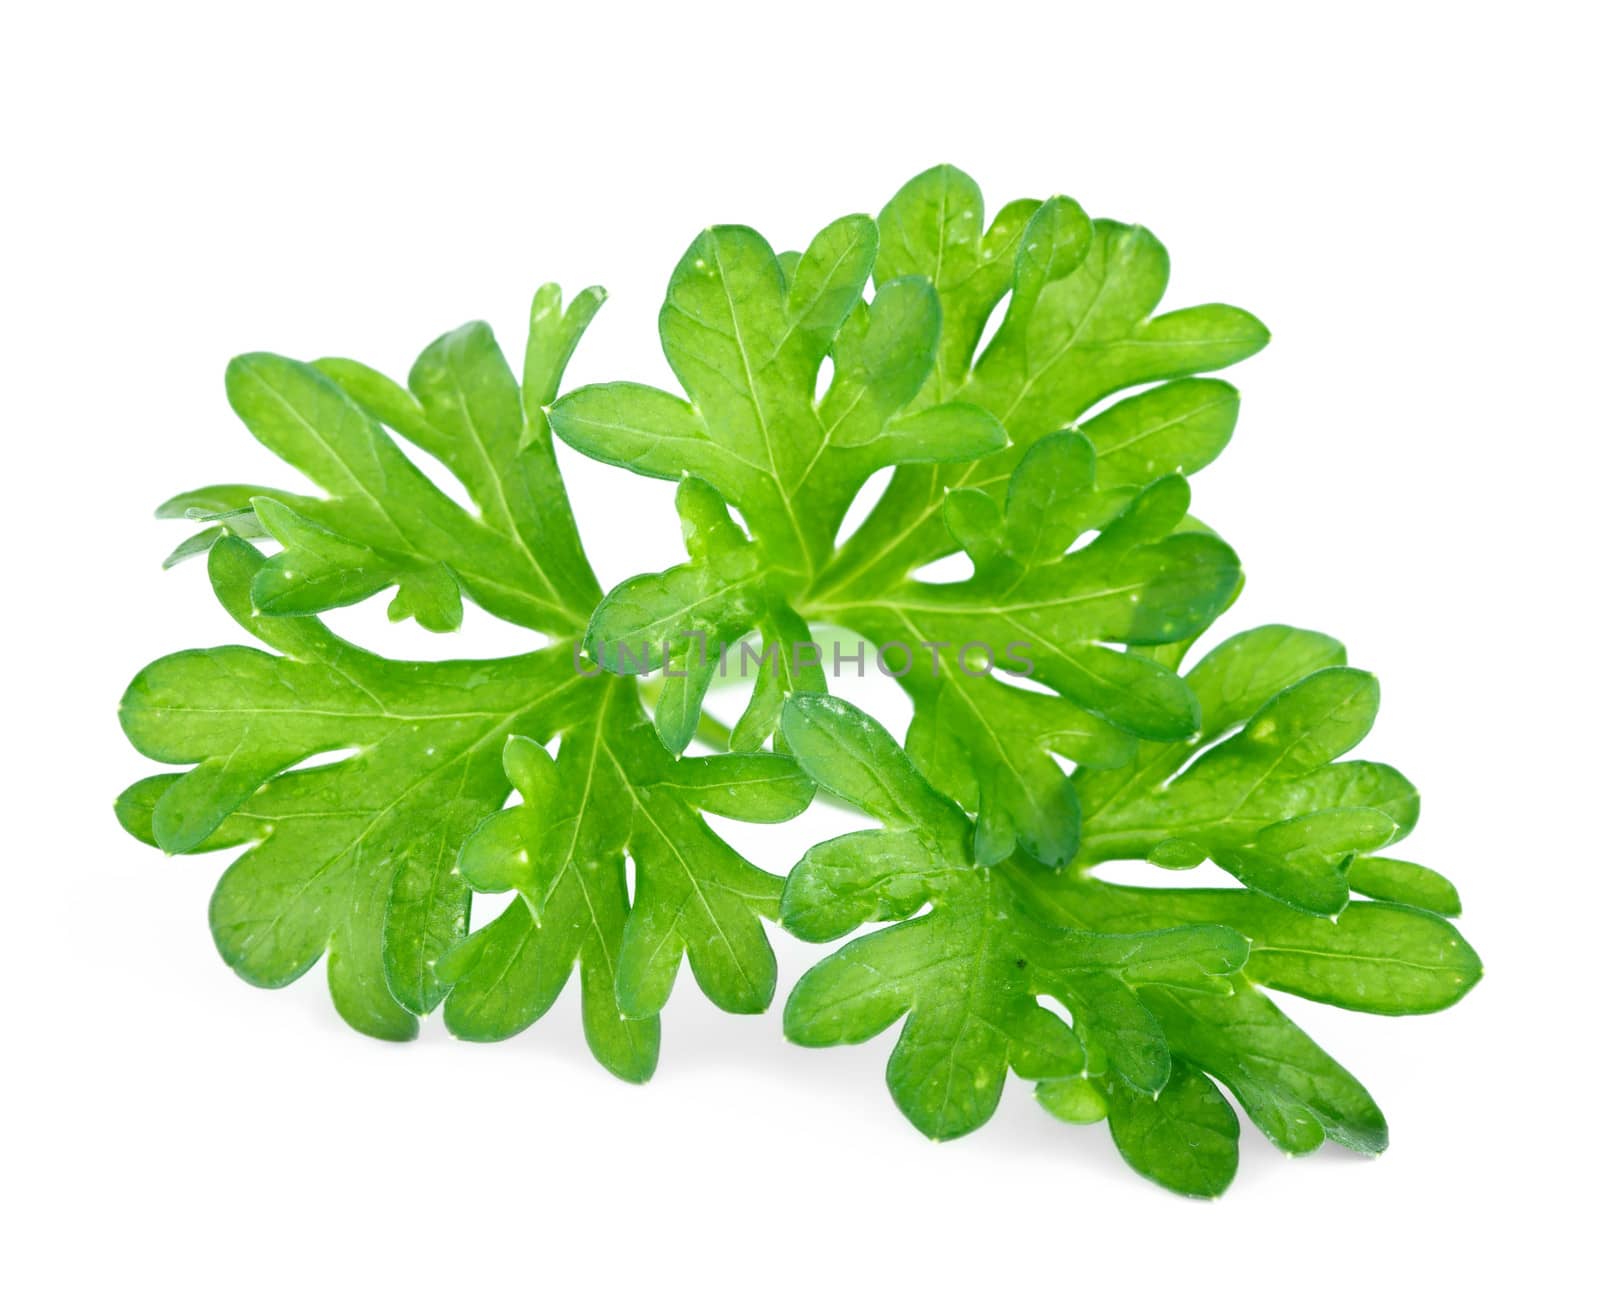 Green leaves of parsley isolated on white background by Bedolaga